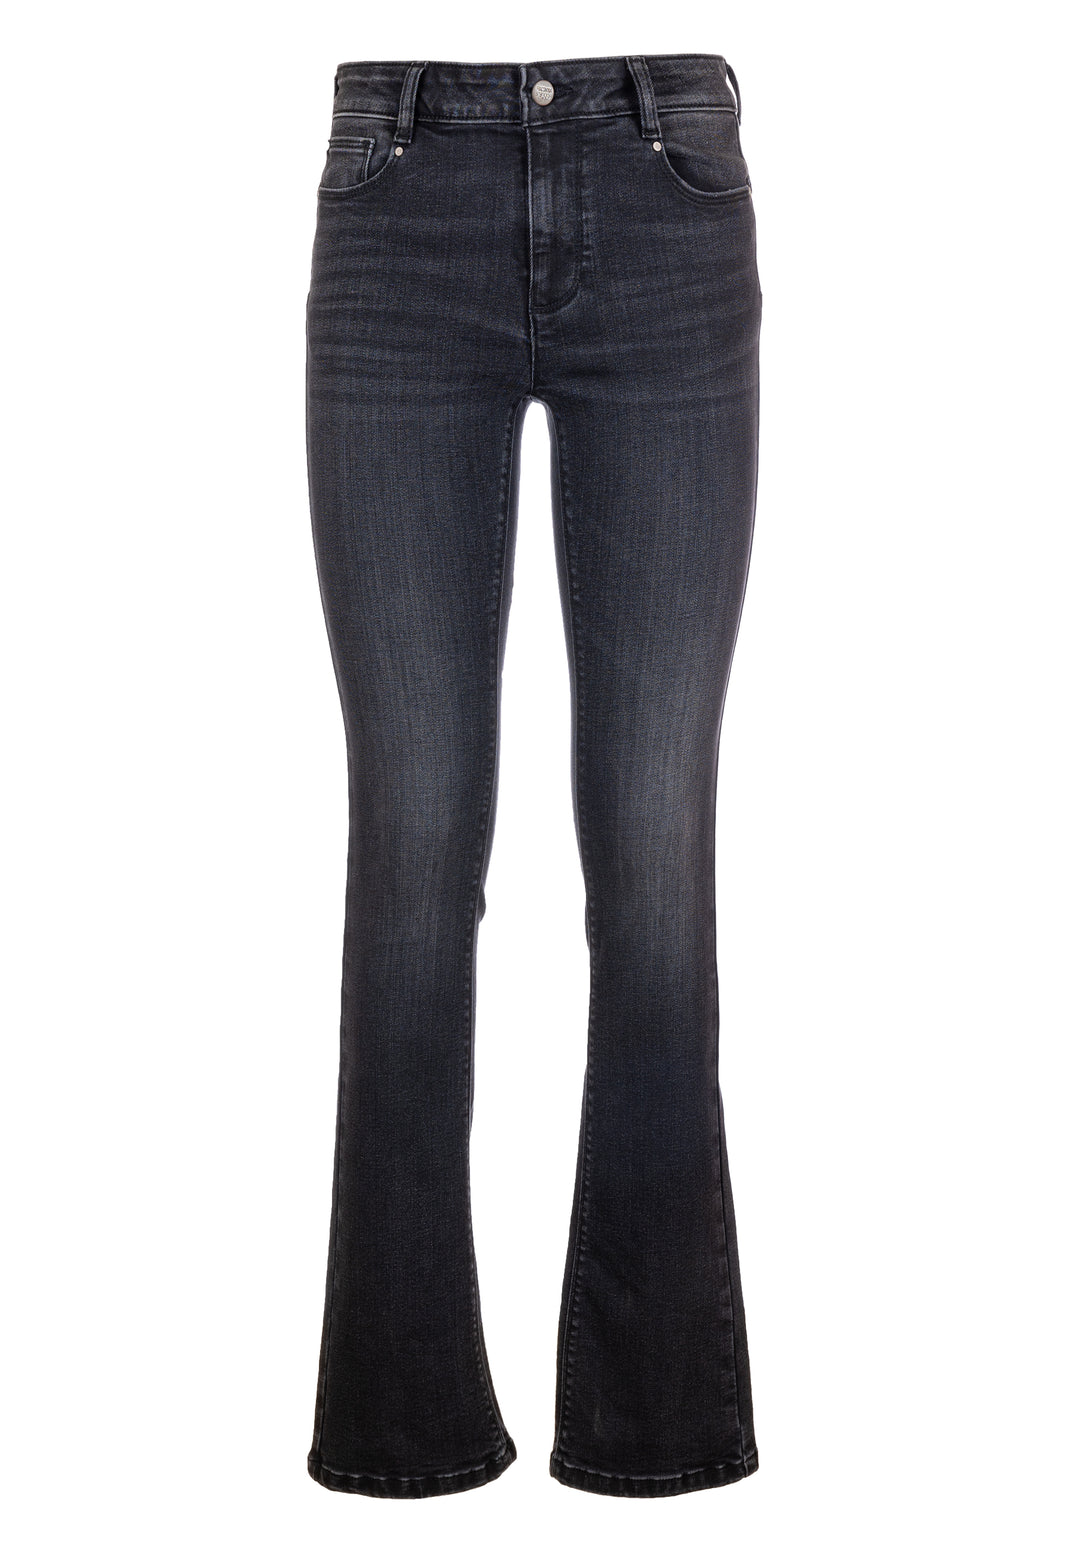 Jeans bootcut with push up effect made in black denim with dark wash Fracomina FP23WV8020D40801-053-1